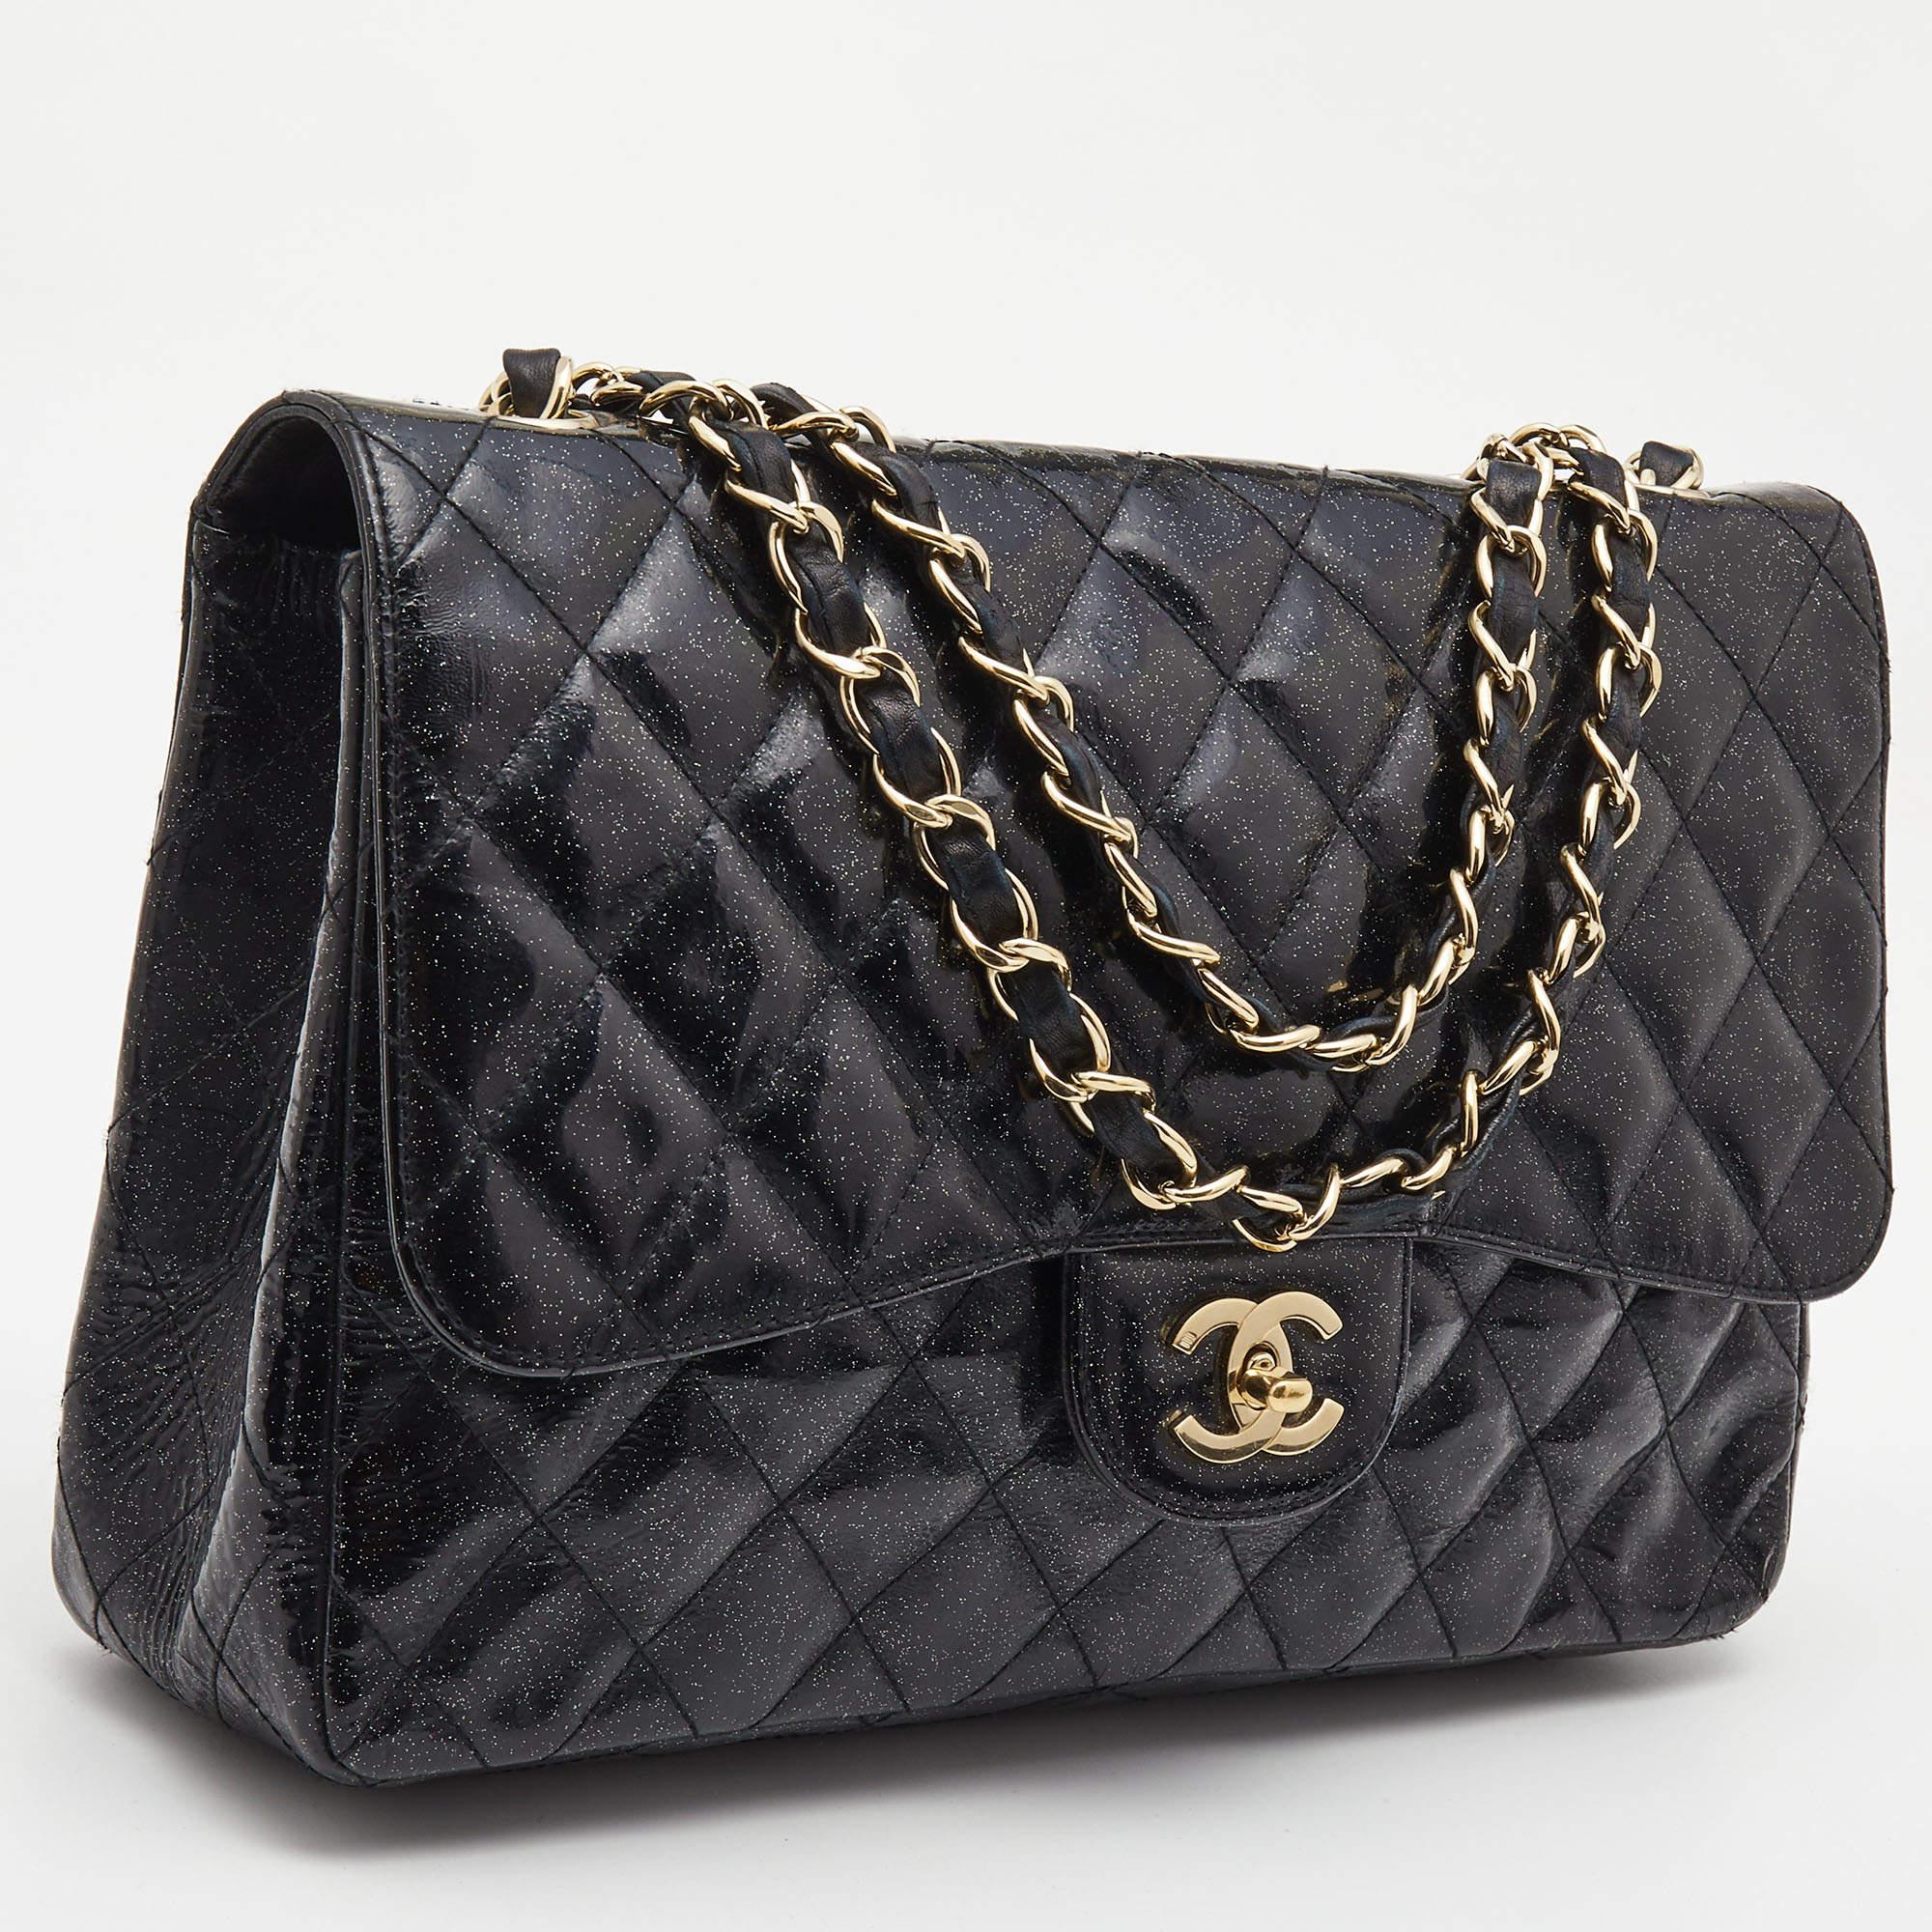 A classic handbag comes with the promise of enduring appeal, boosting your style time and again. This Chanel black bag is one such creation. It’s a fine purchase.

